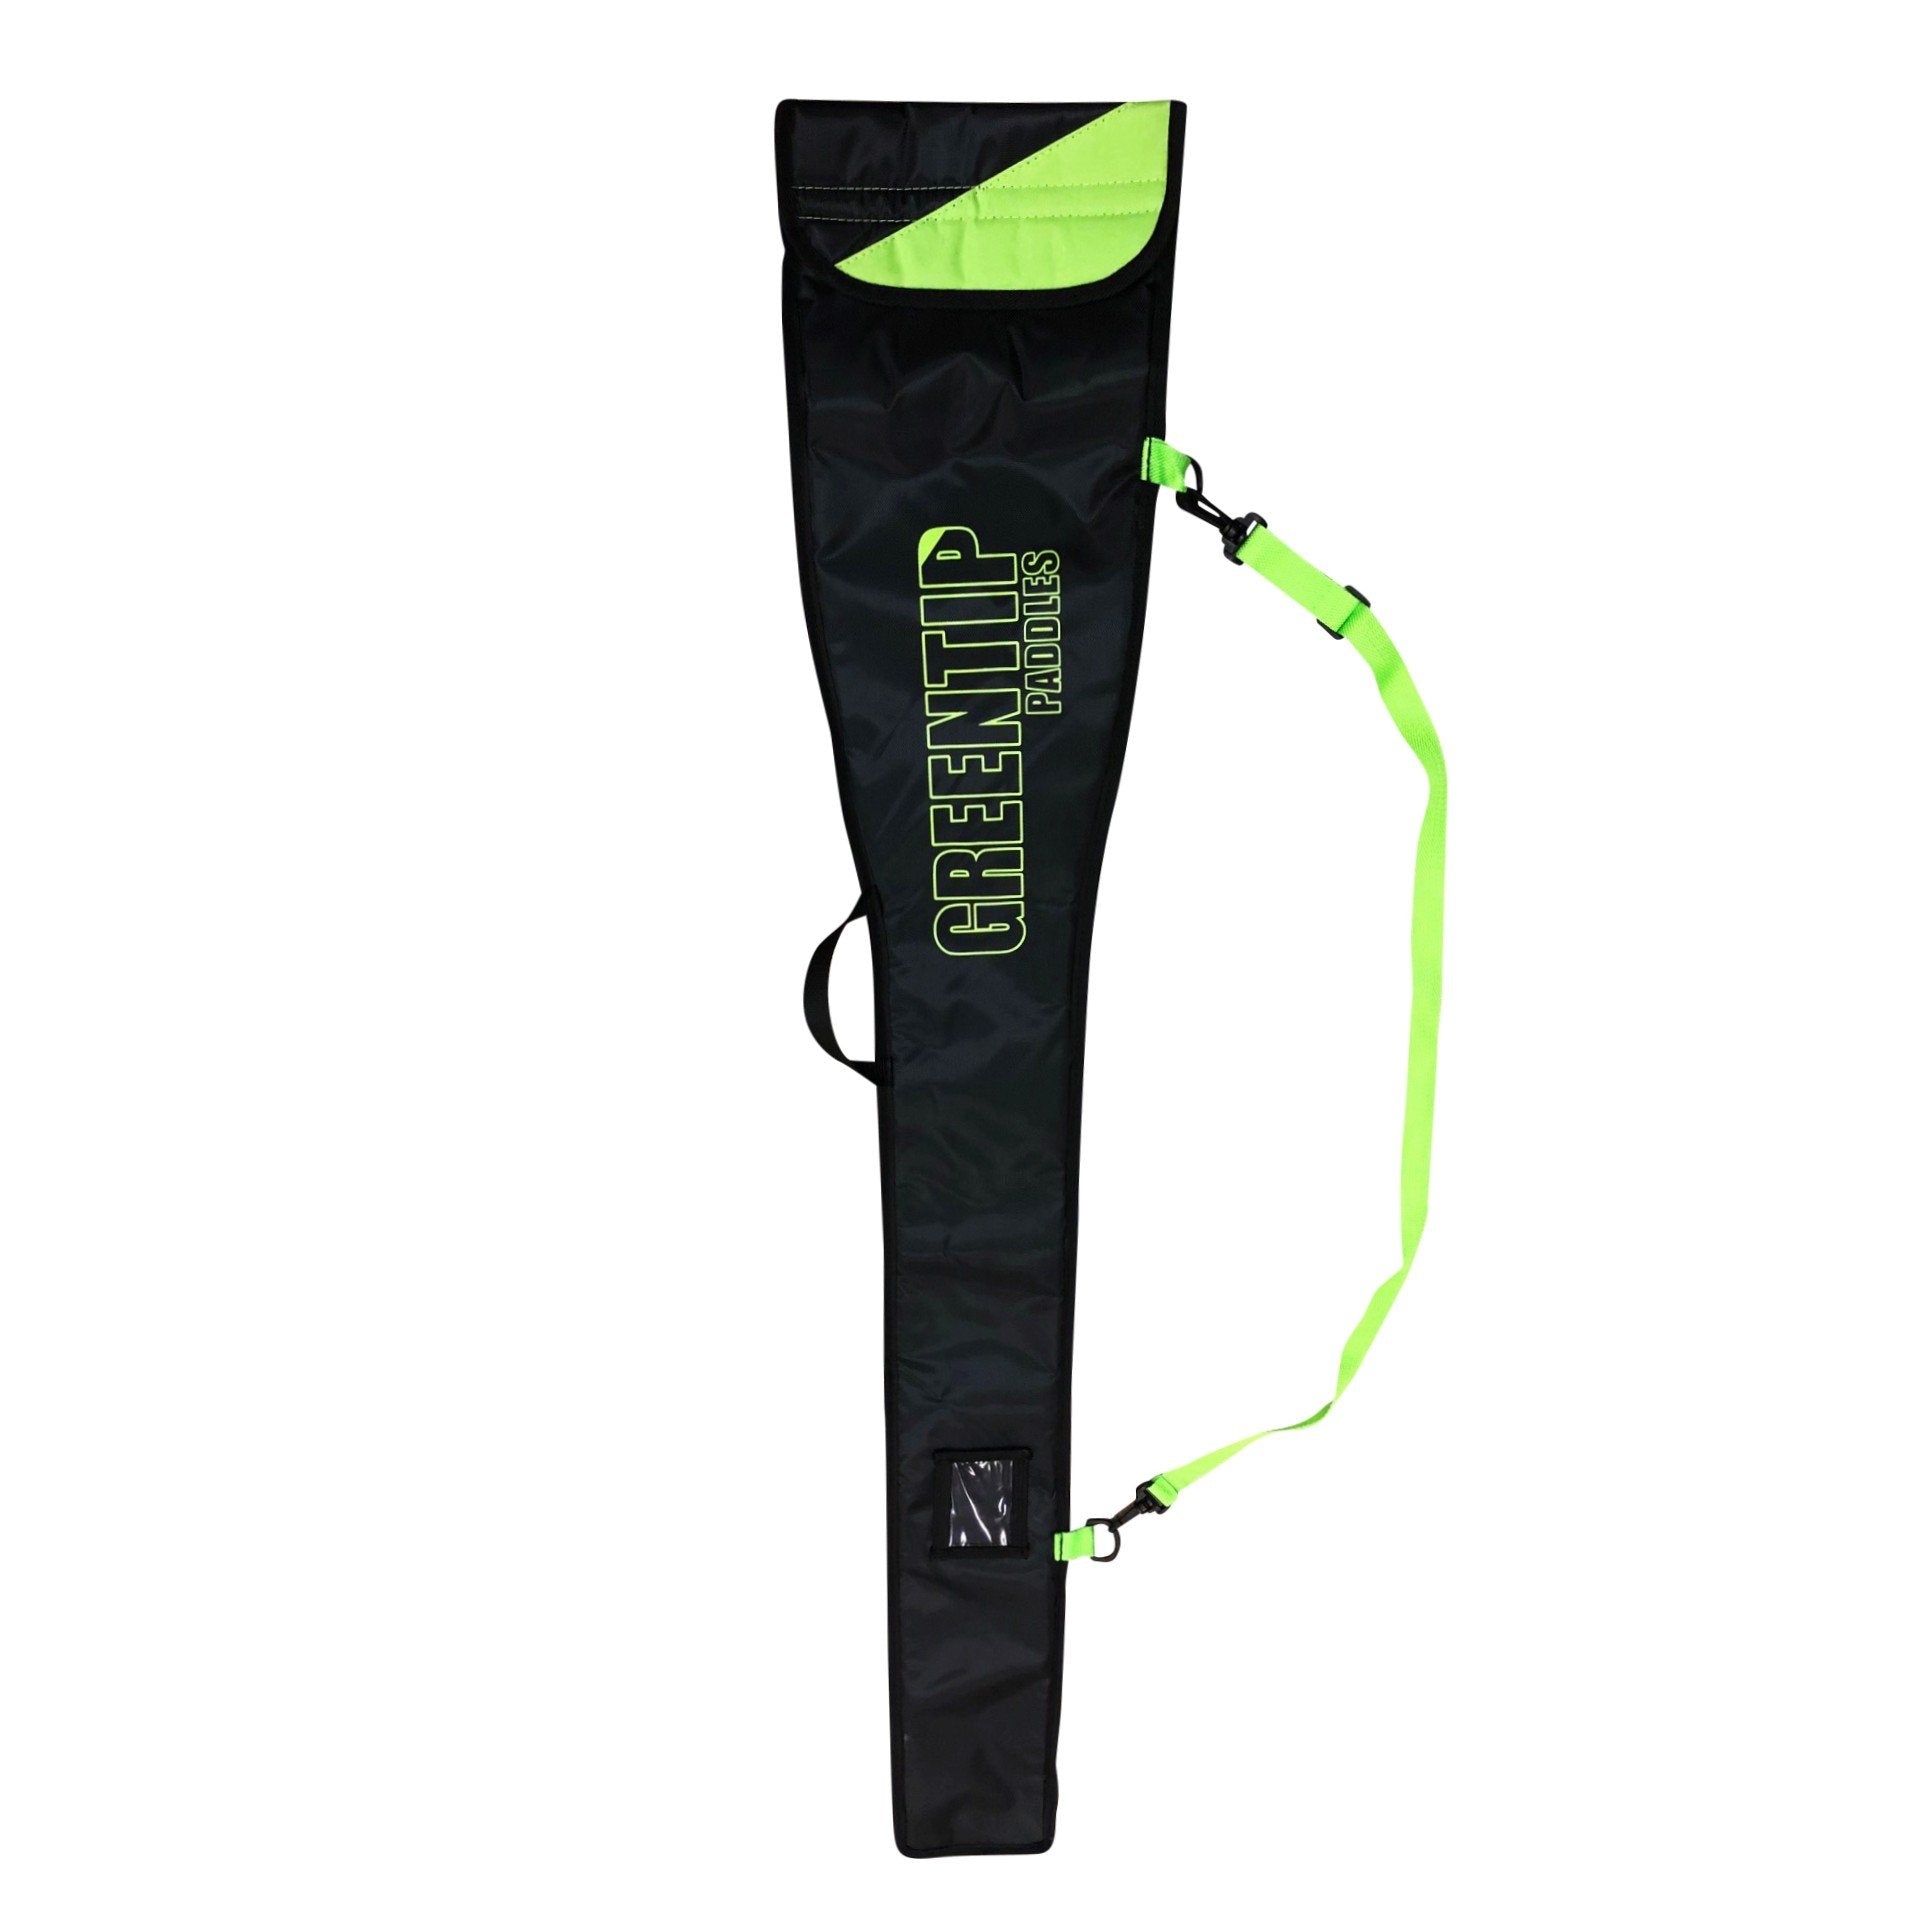 Greentip Bow Touring Paddle with Bent Shaft, Carbon